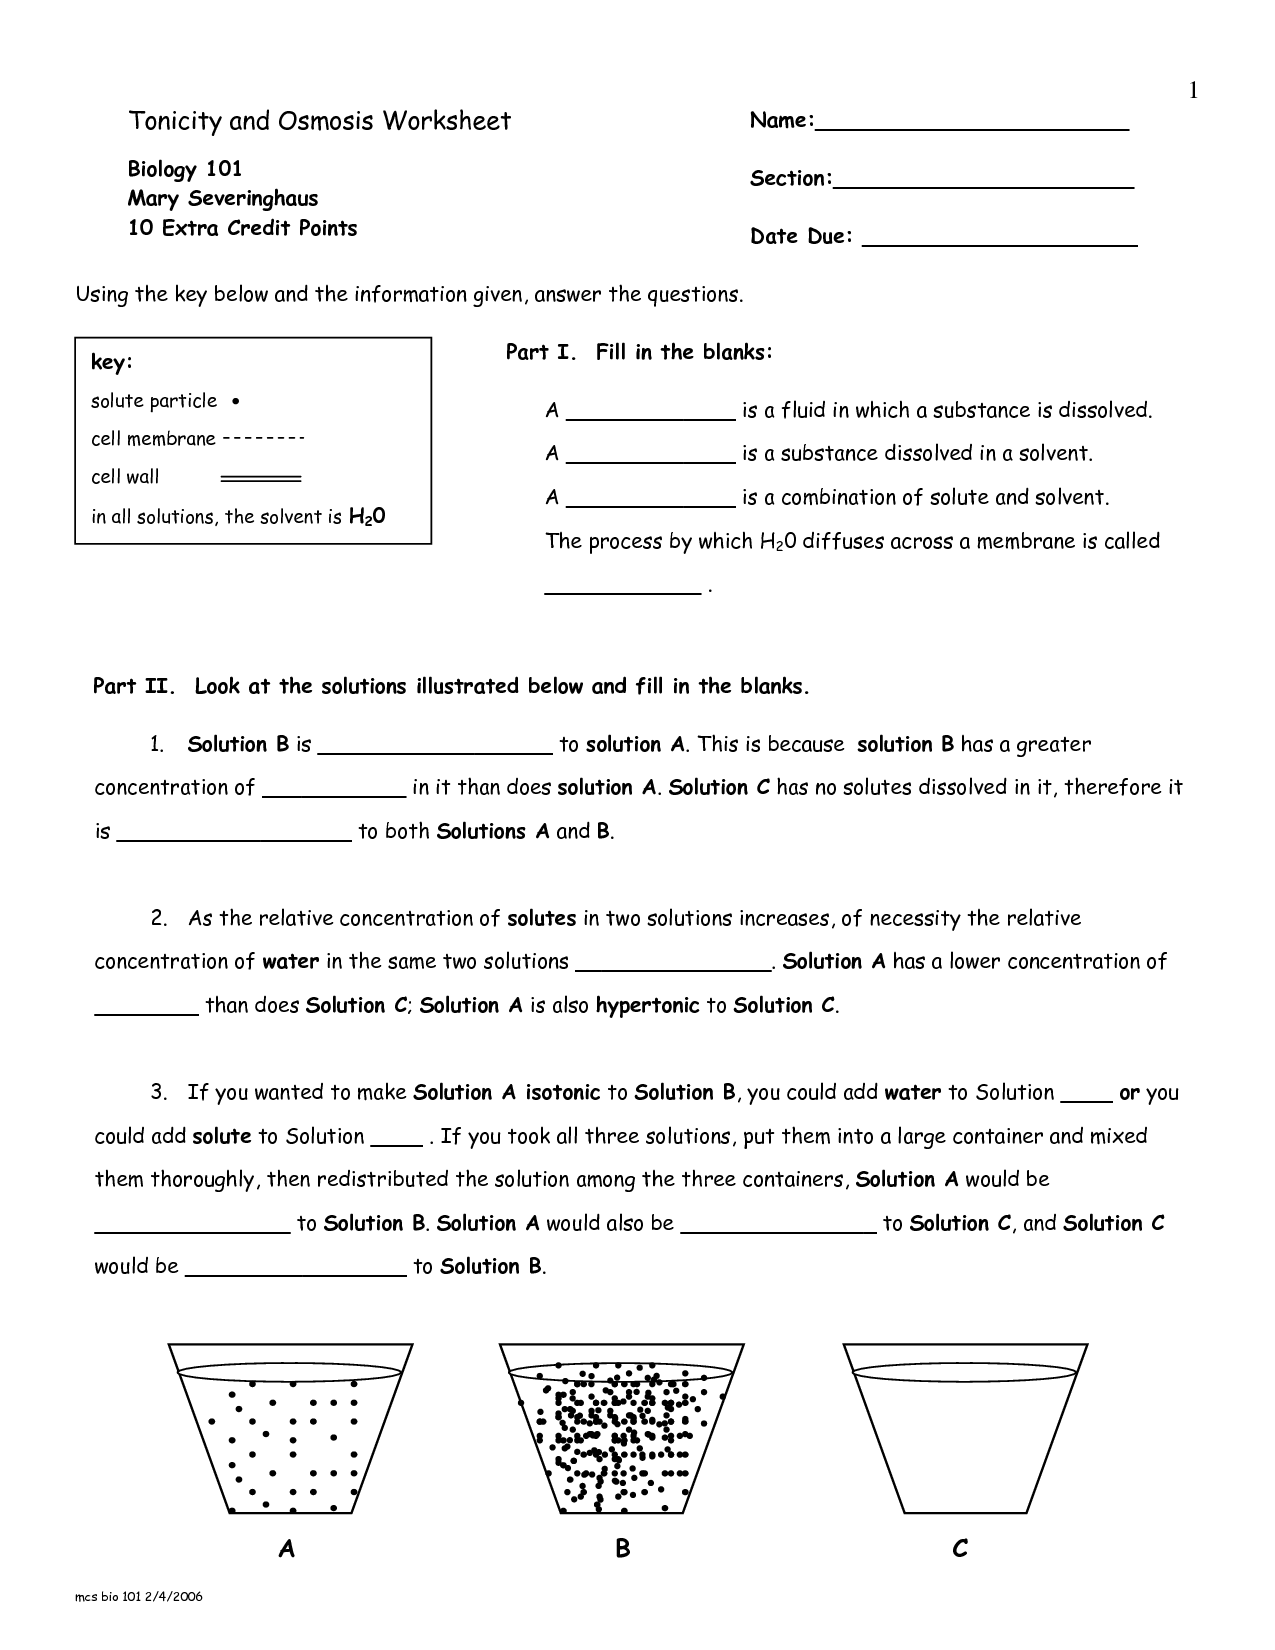 13-best-images-of-diffusion-worksheet-key-osmosis-and-tonicity-worksheet-answer-key-diffusion